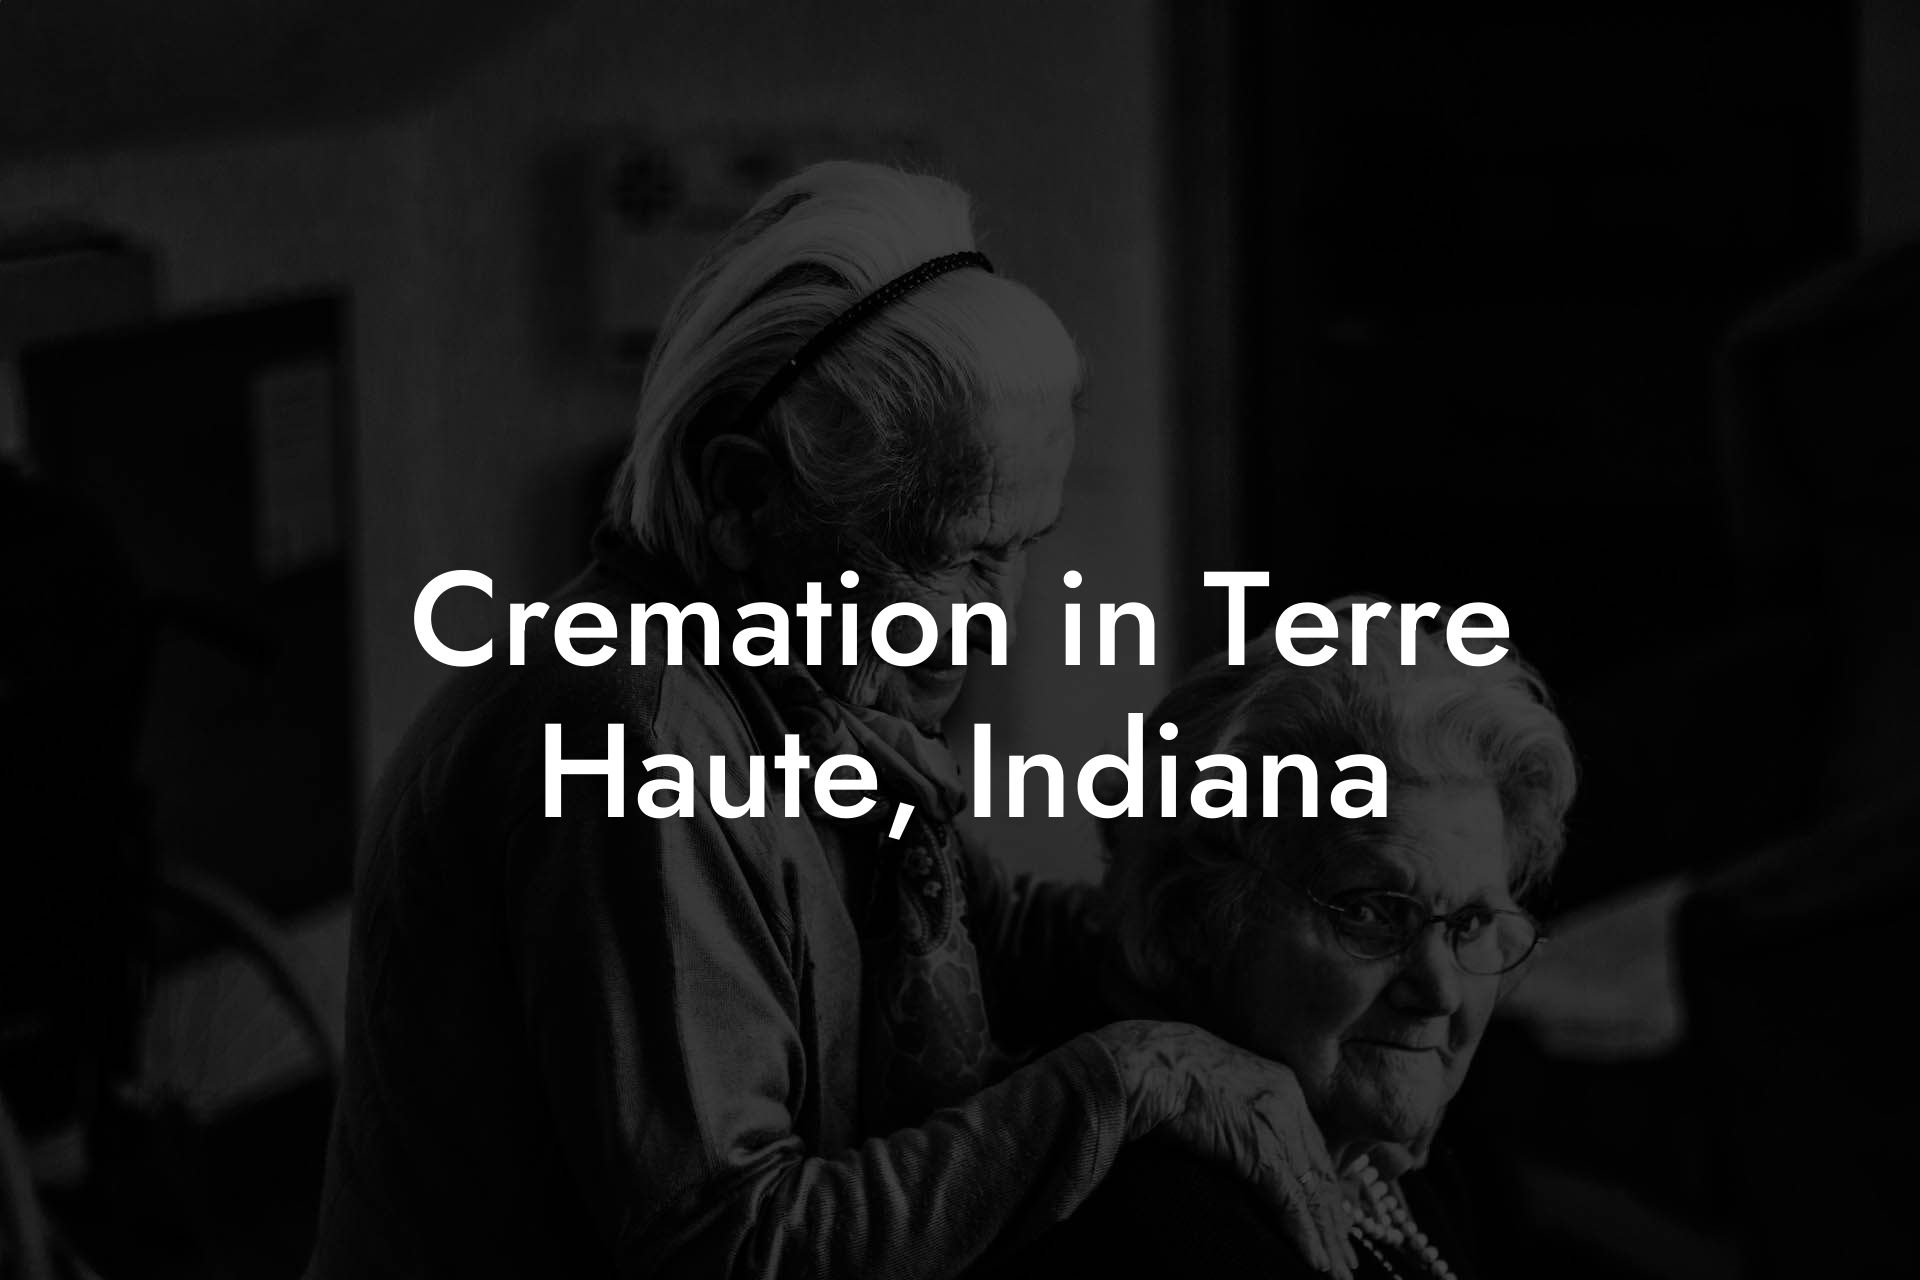 Cremation in Terre Haute, Indiana